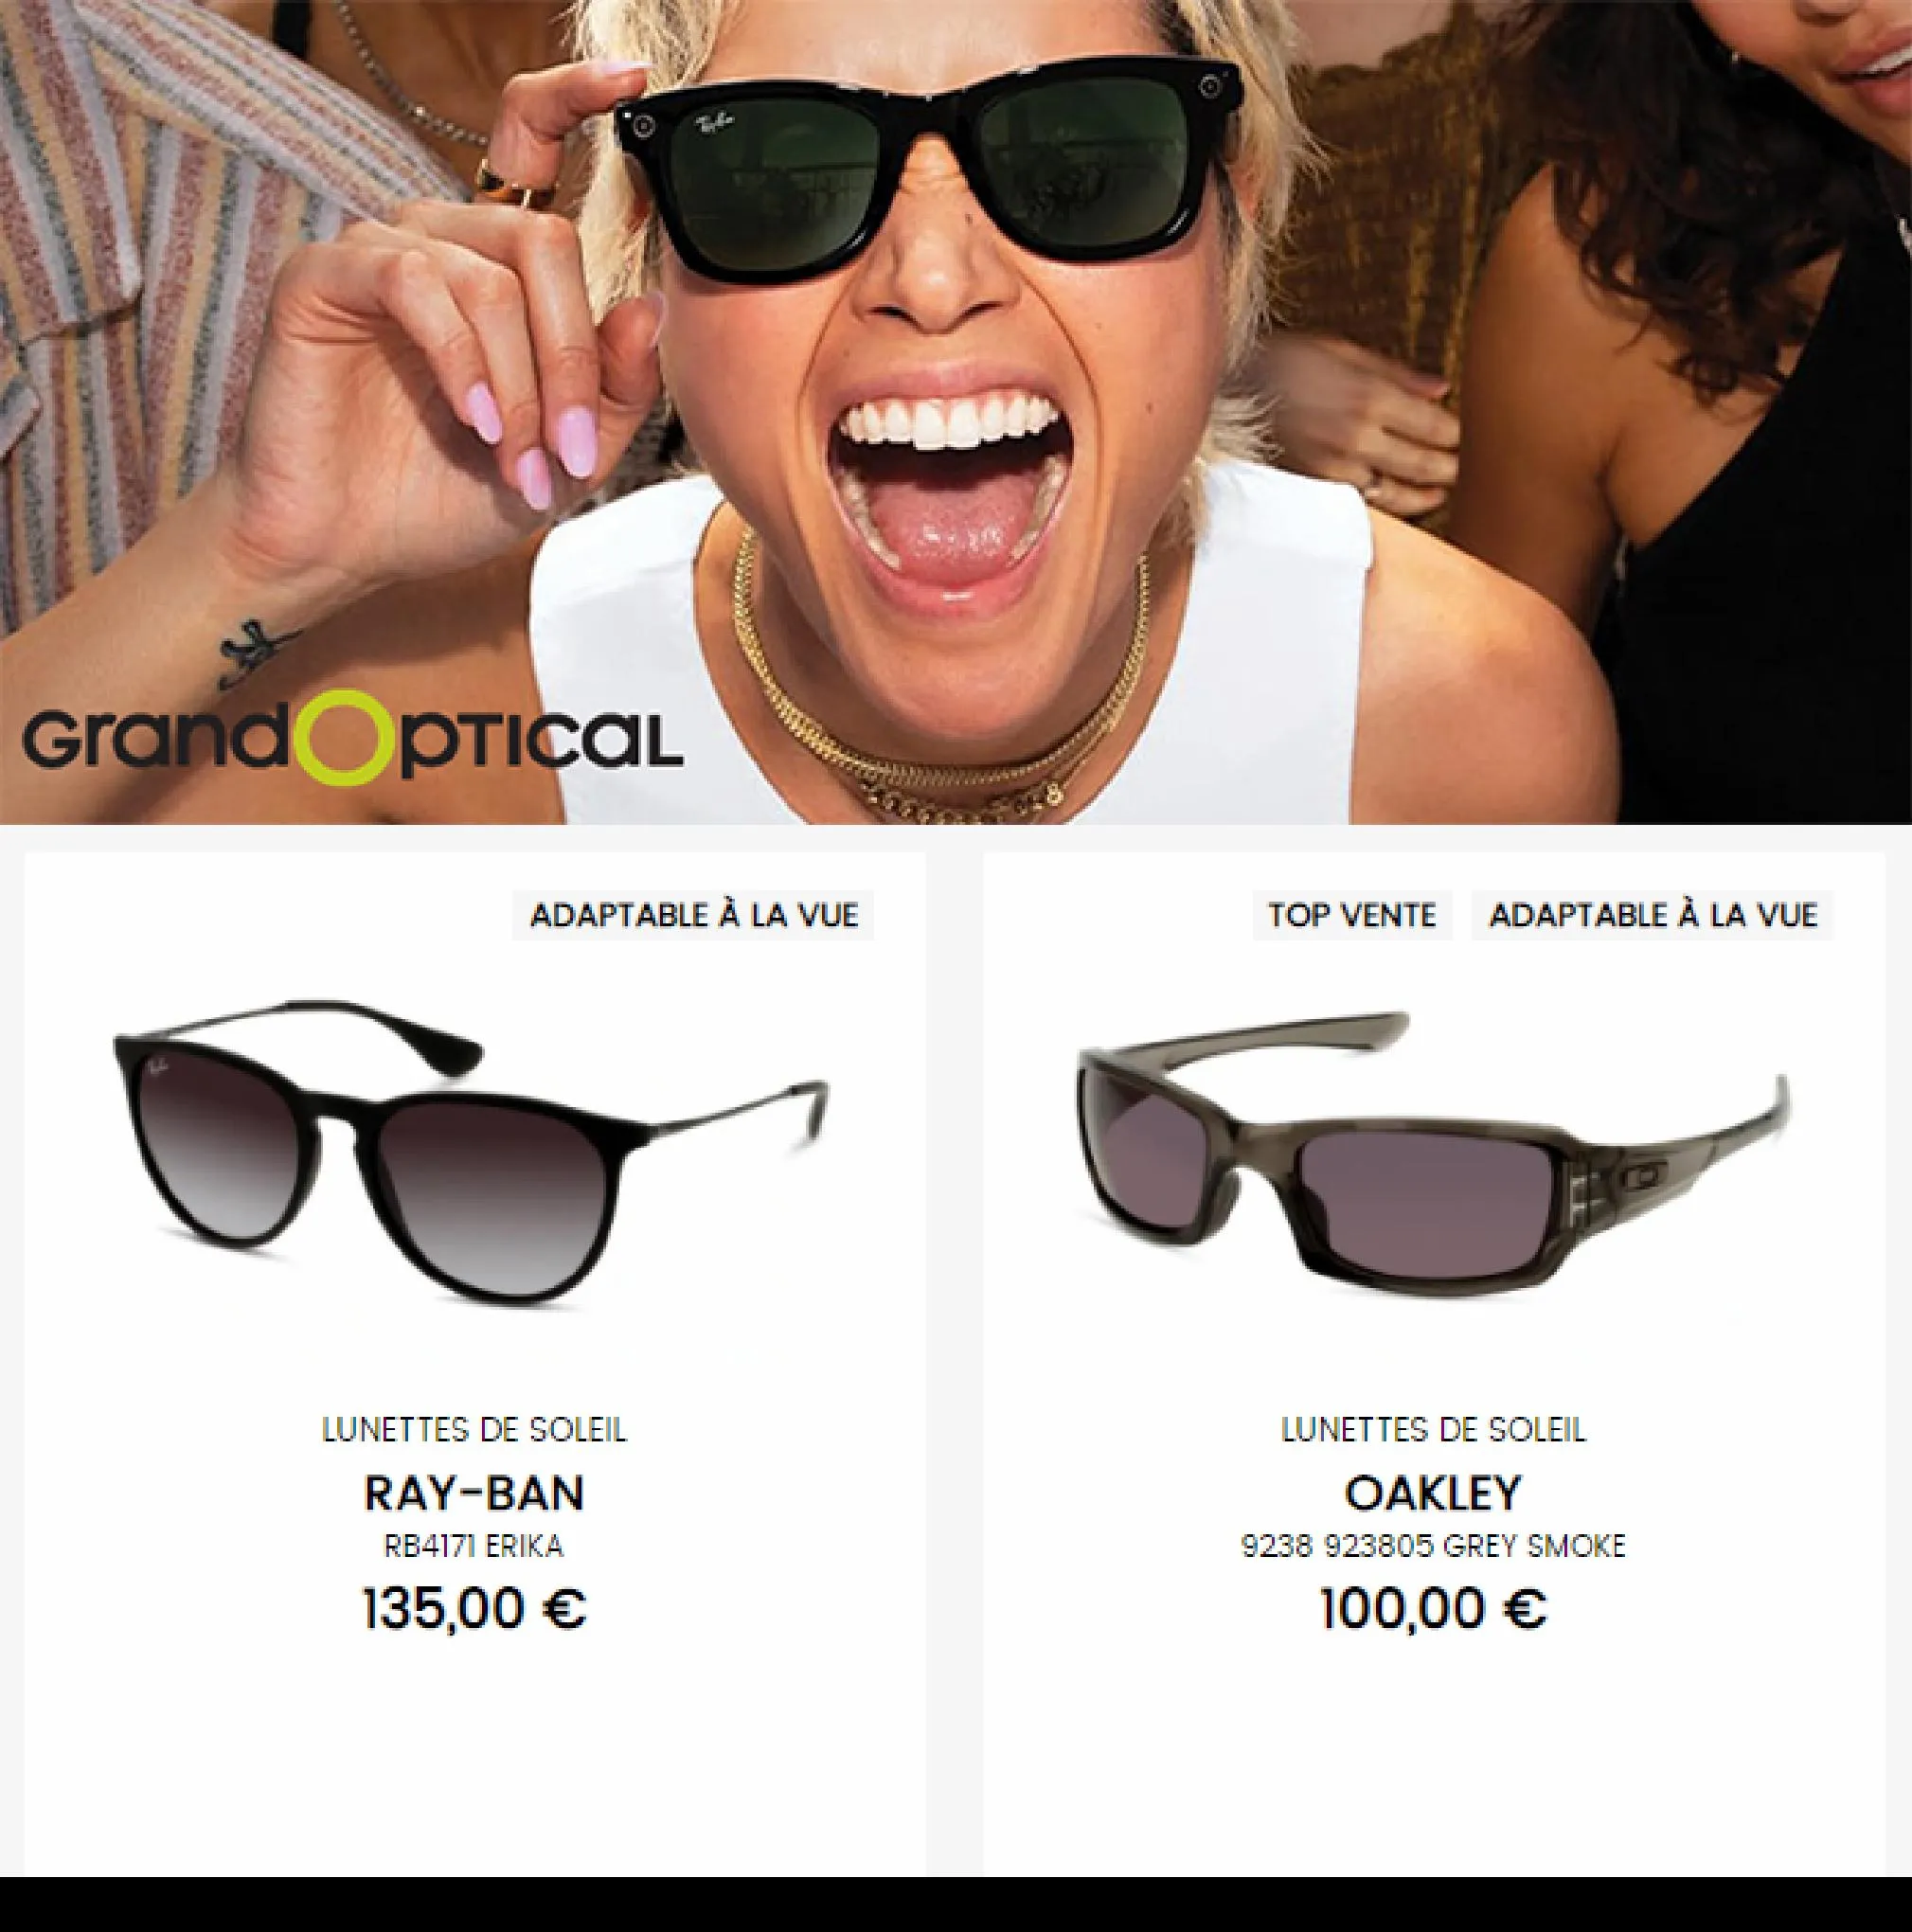 Catalogue Soldes Grand Optical, page 00001